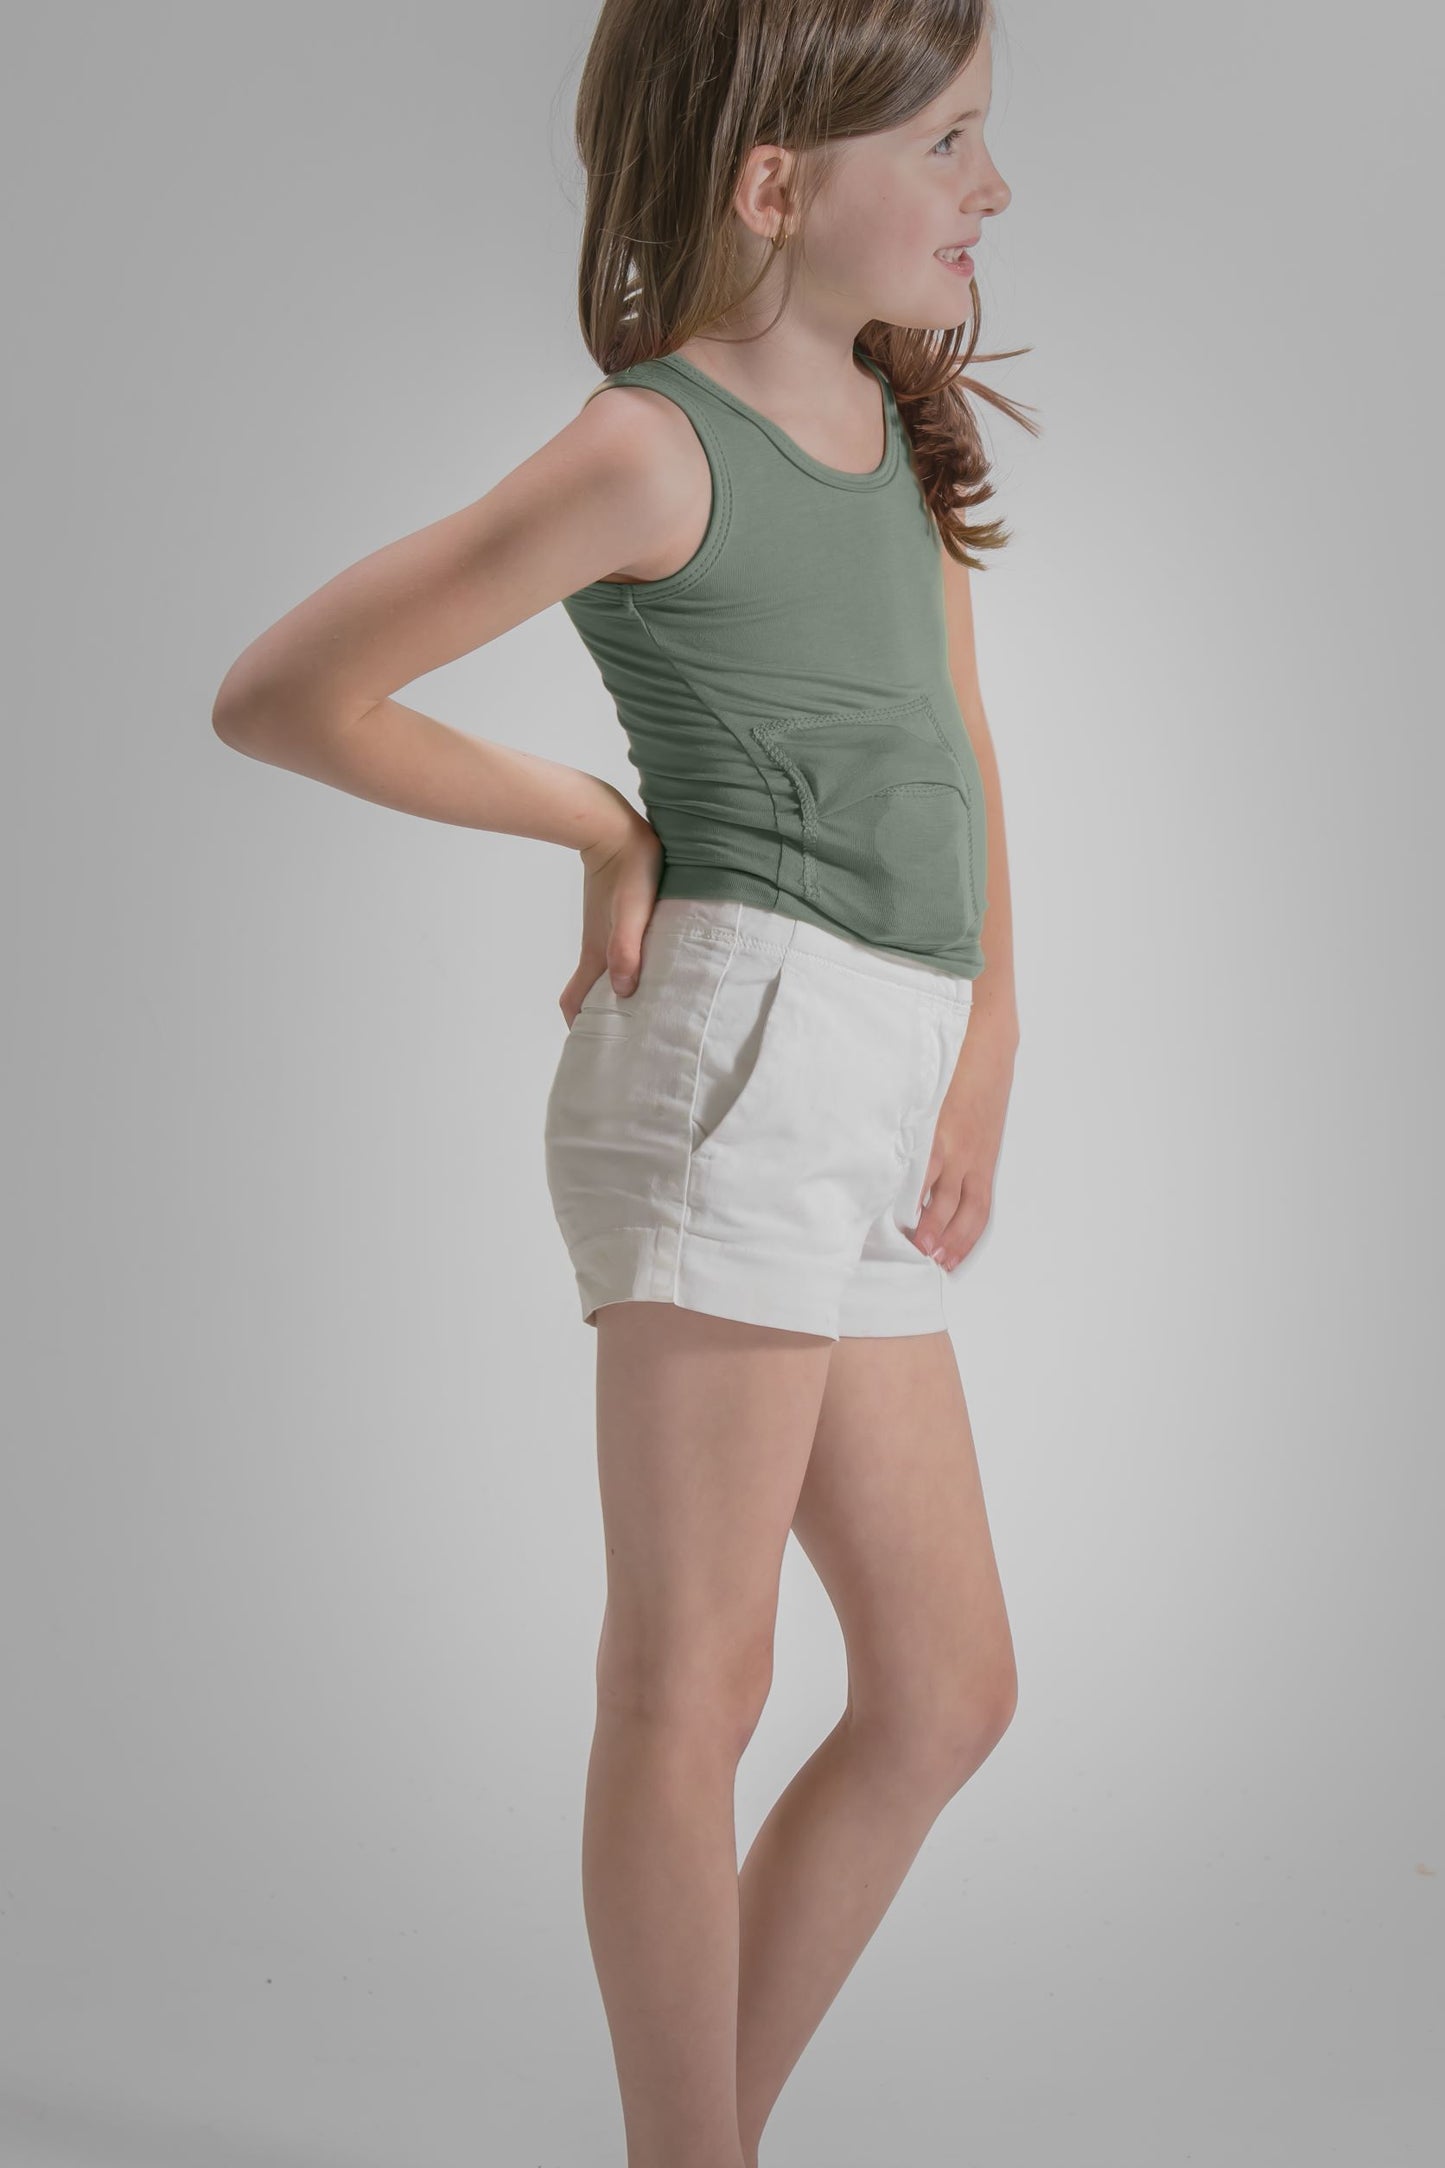 Youth Everyday Stretch Tank with Insulin Pump Pocket